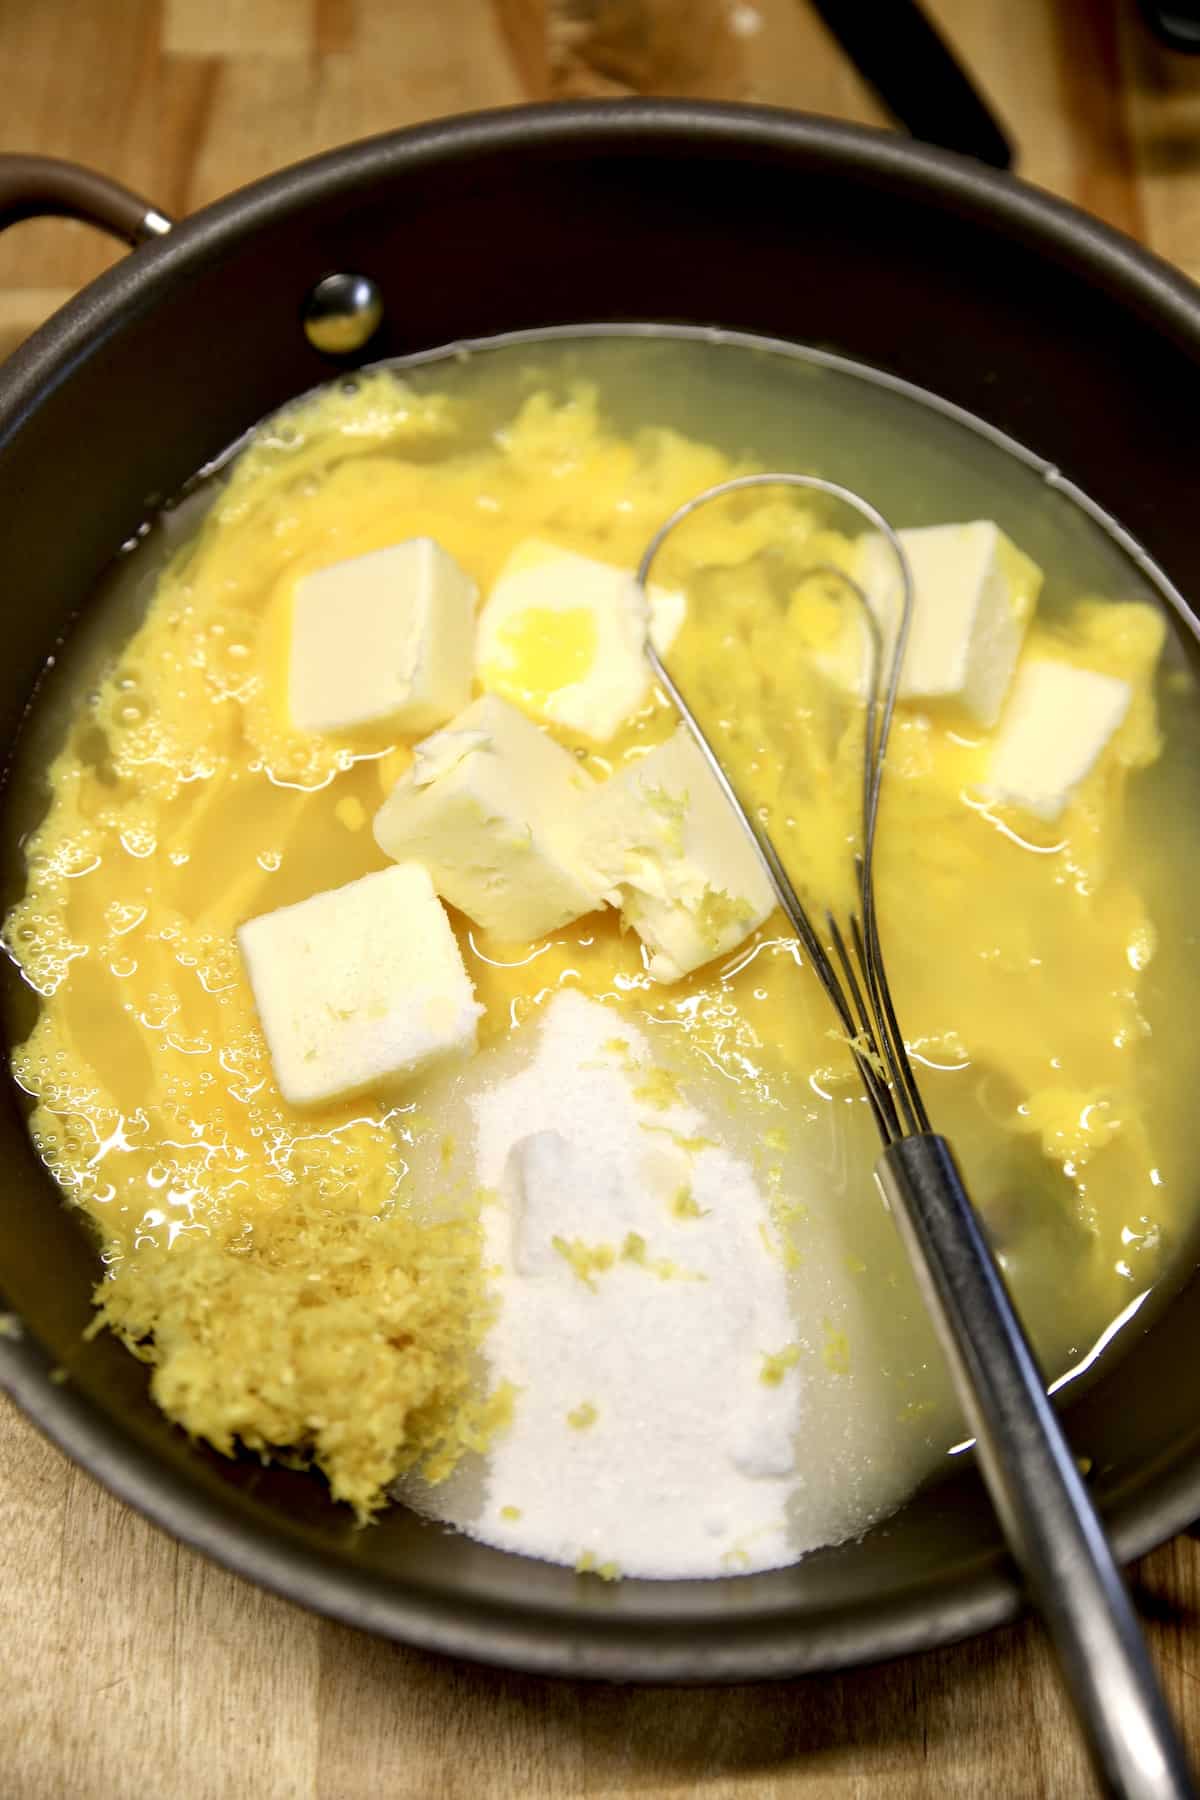 Pan with eggs, lemon juice, zest, sugar and butter.